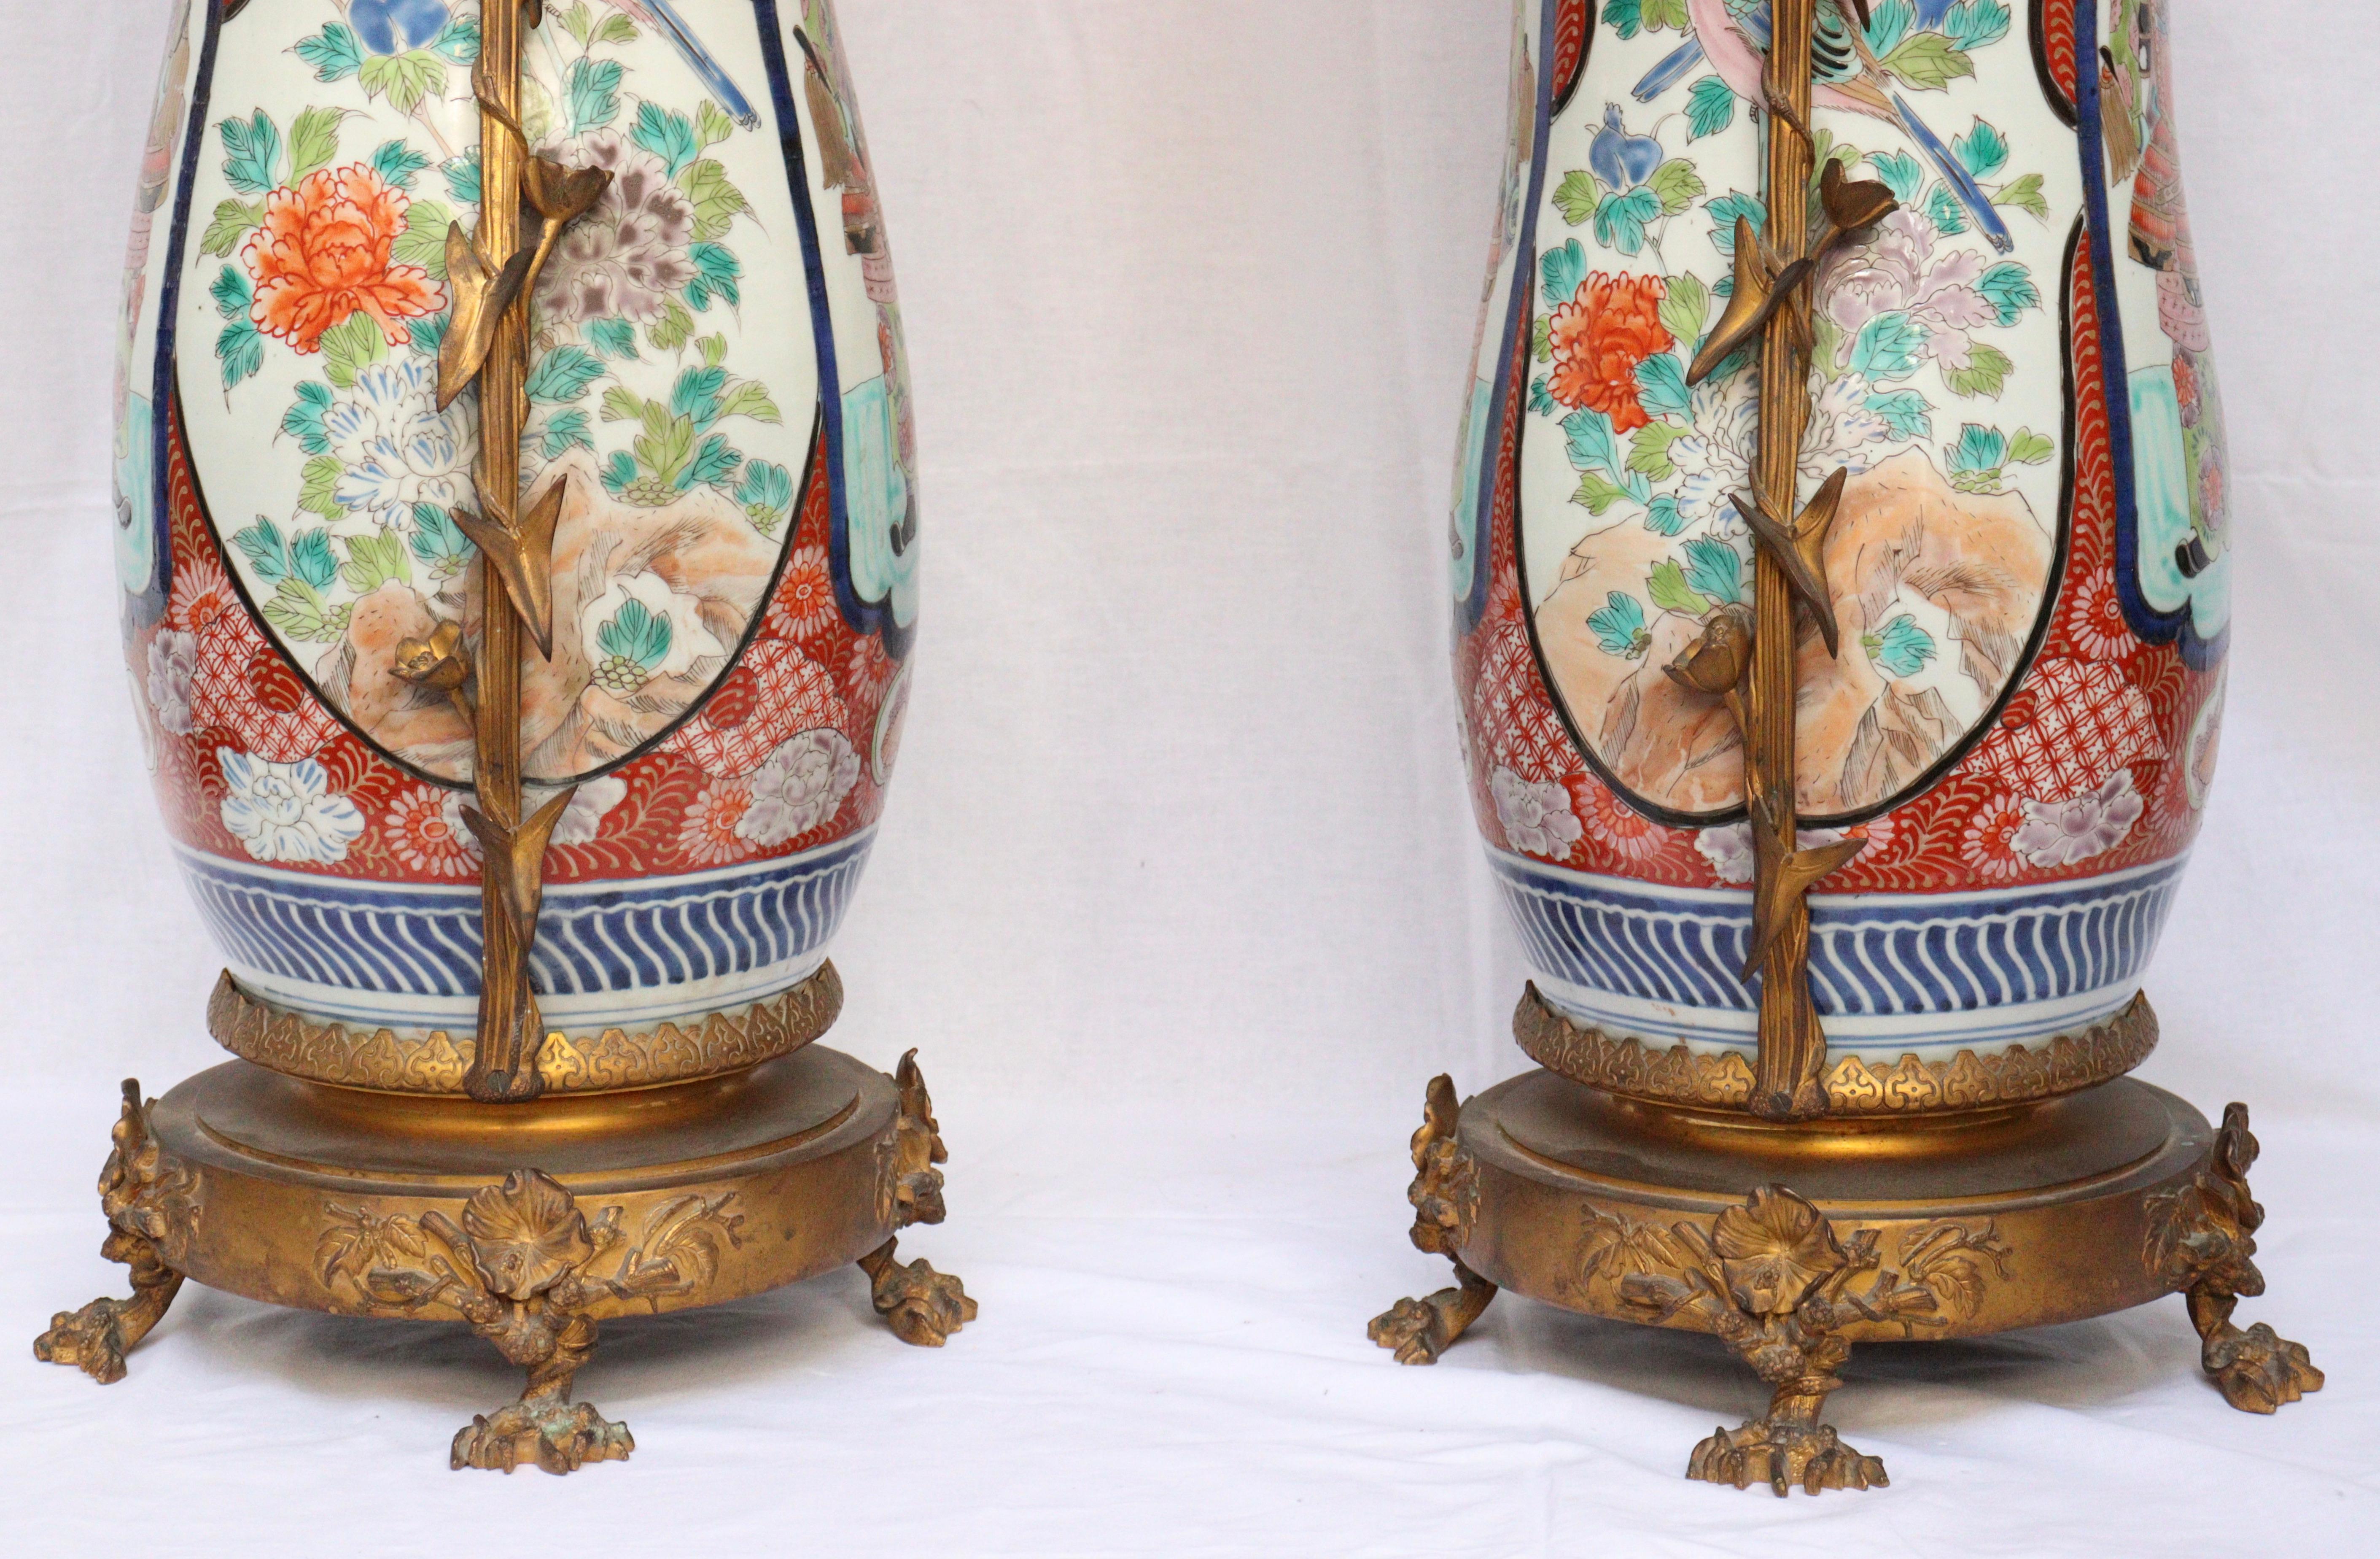 19th Century Japanese Porcelain and Ormolu-Mounted Pair of Vases 2